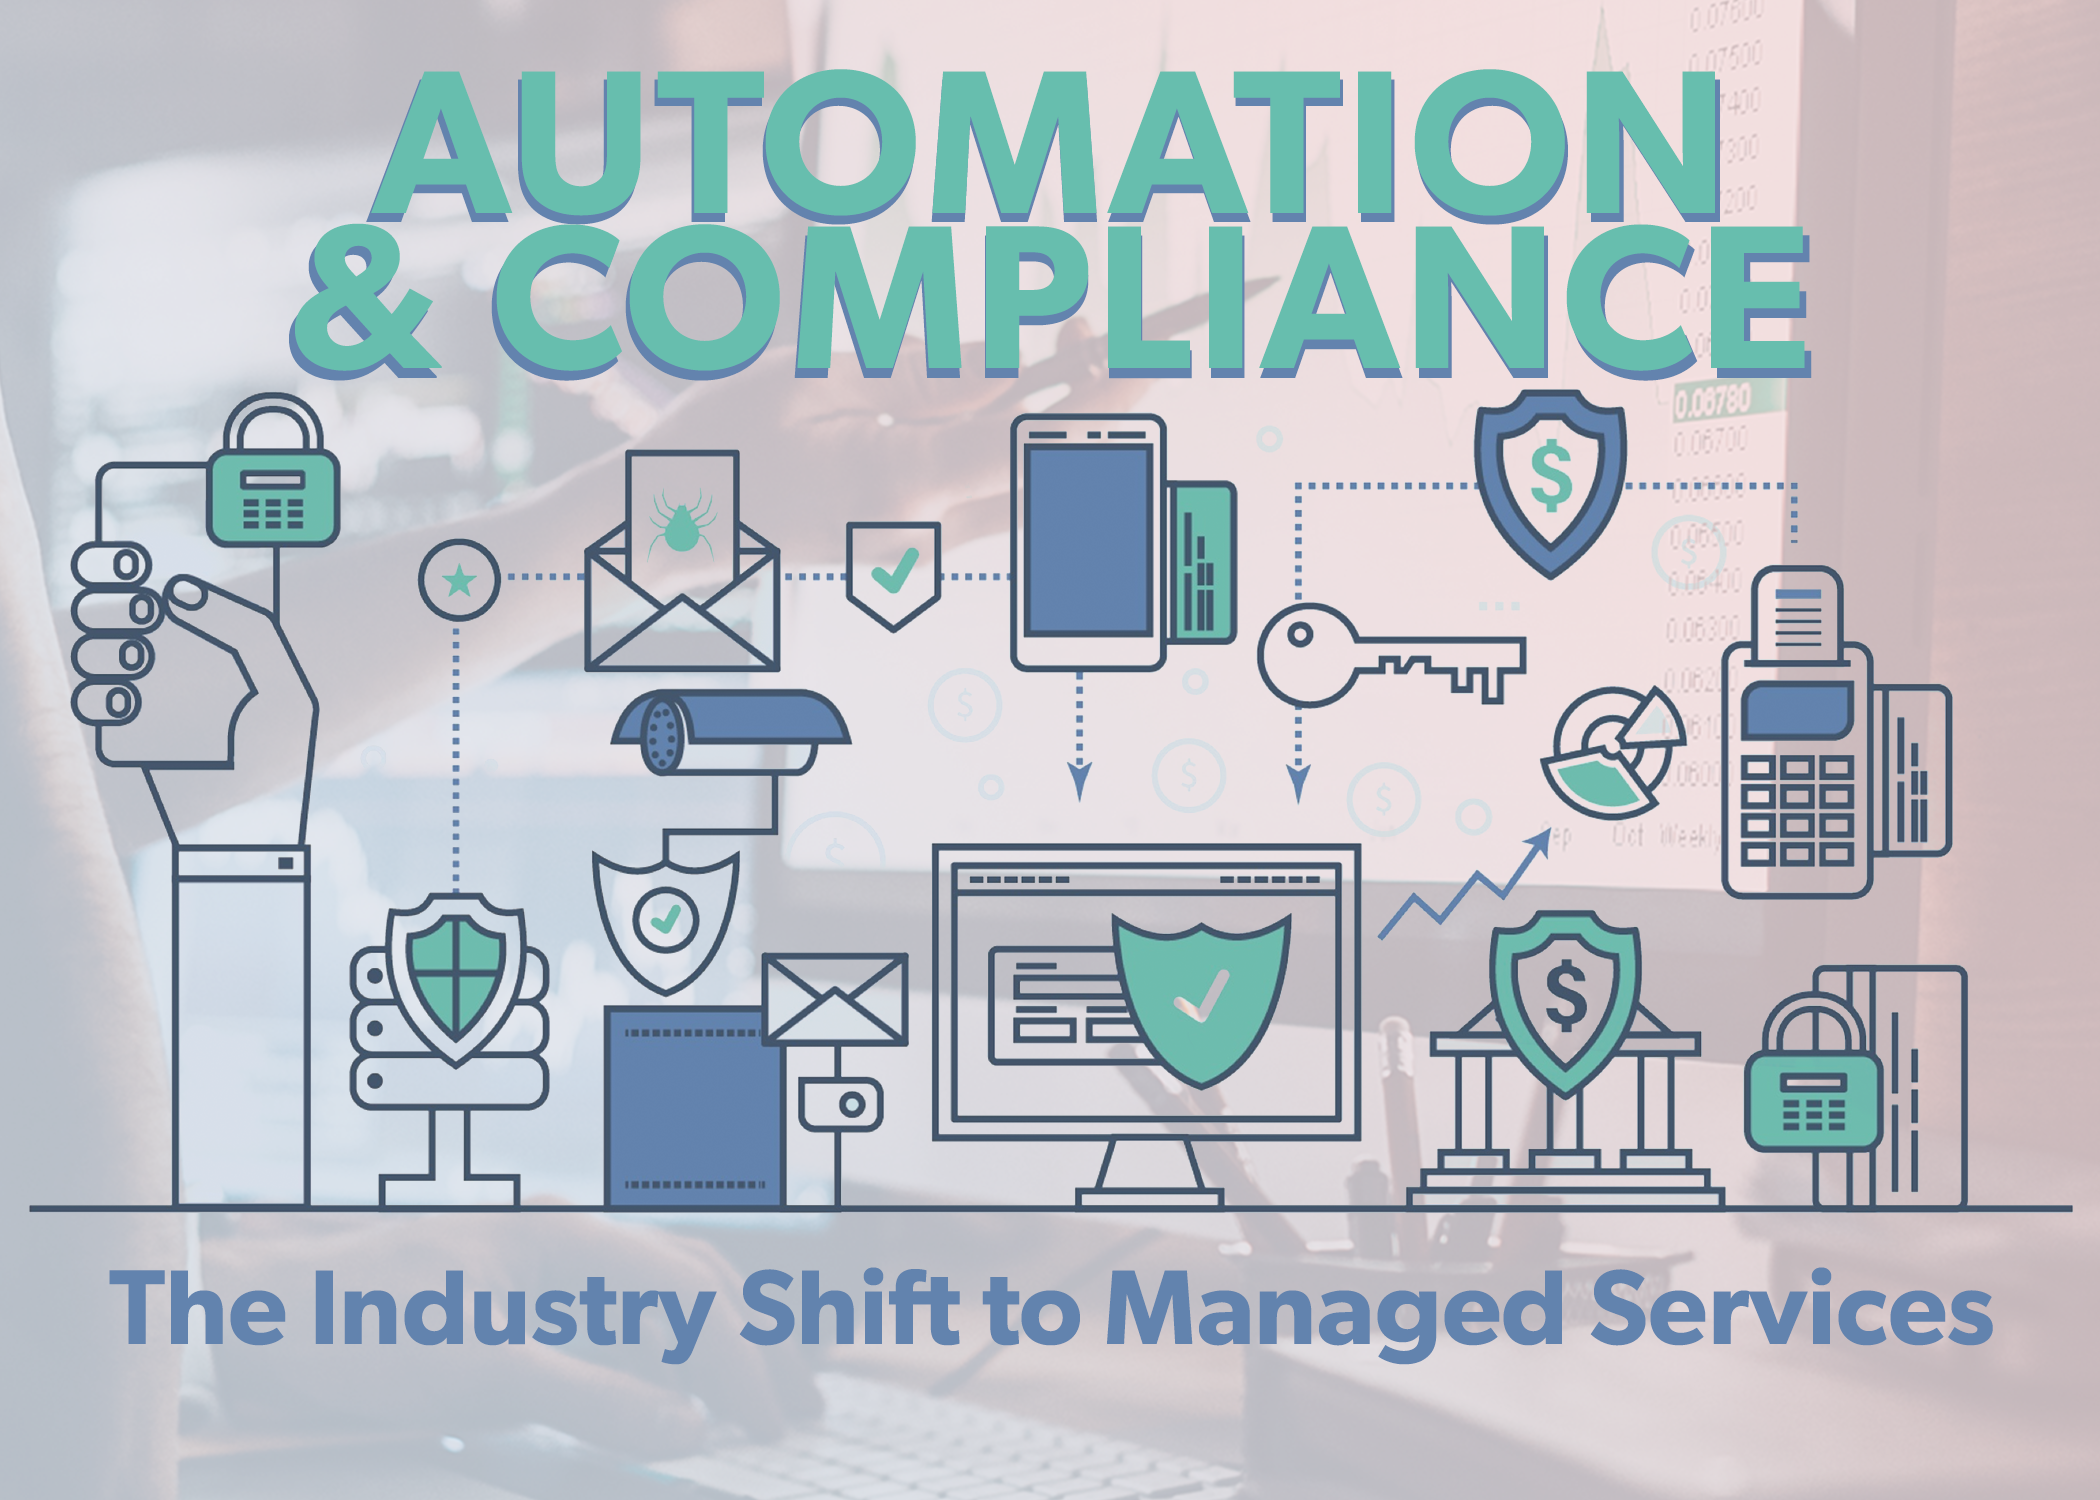 Automation and Compliance: The Industry Shift to Managed Services